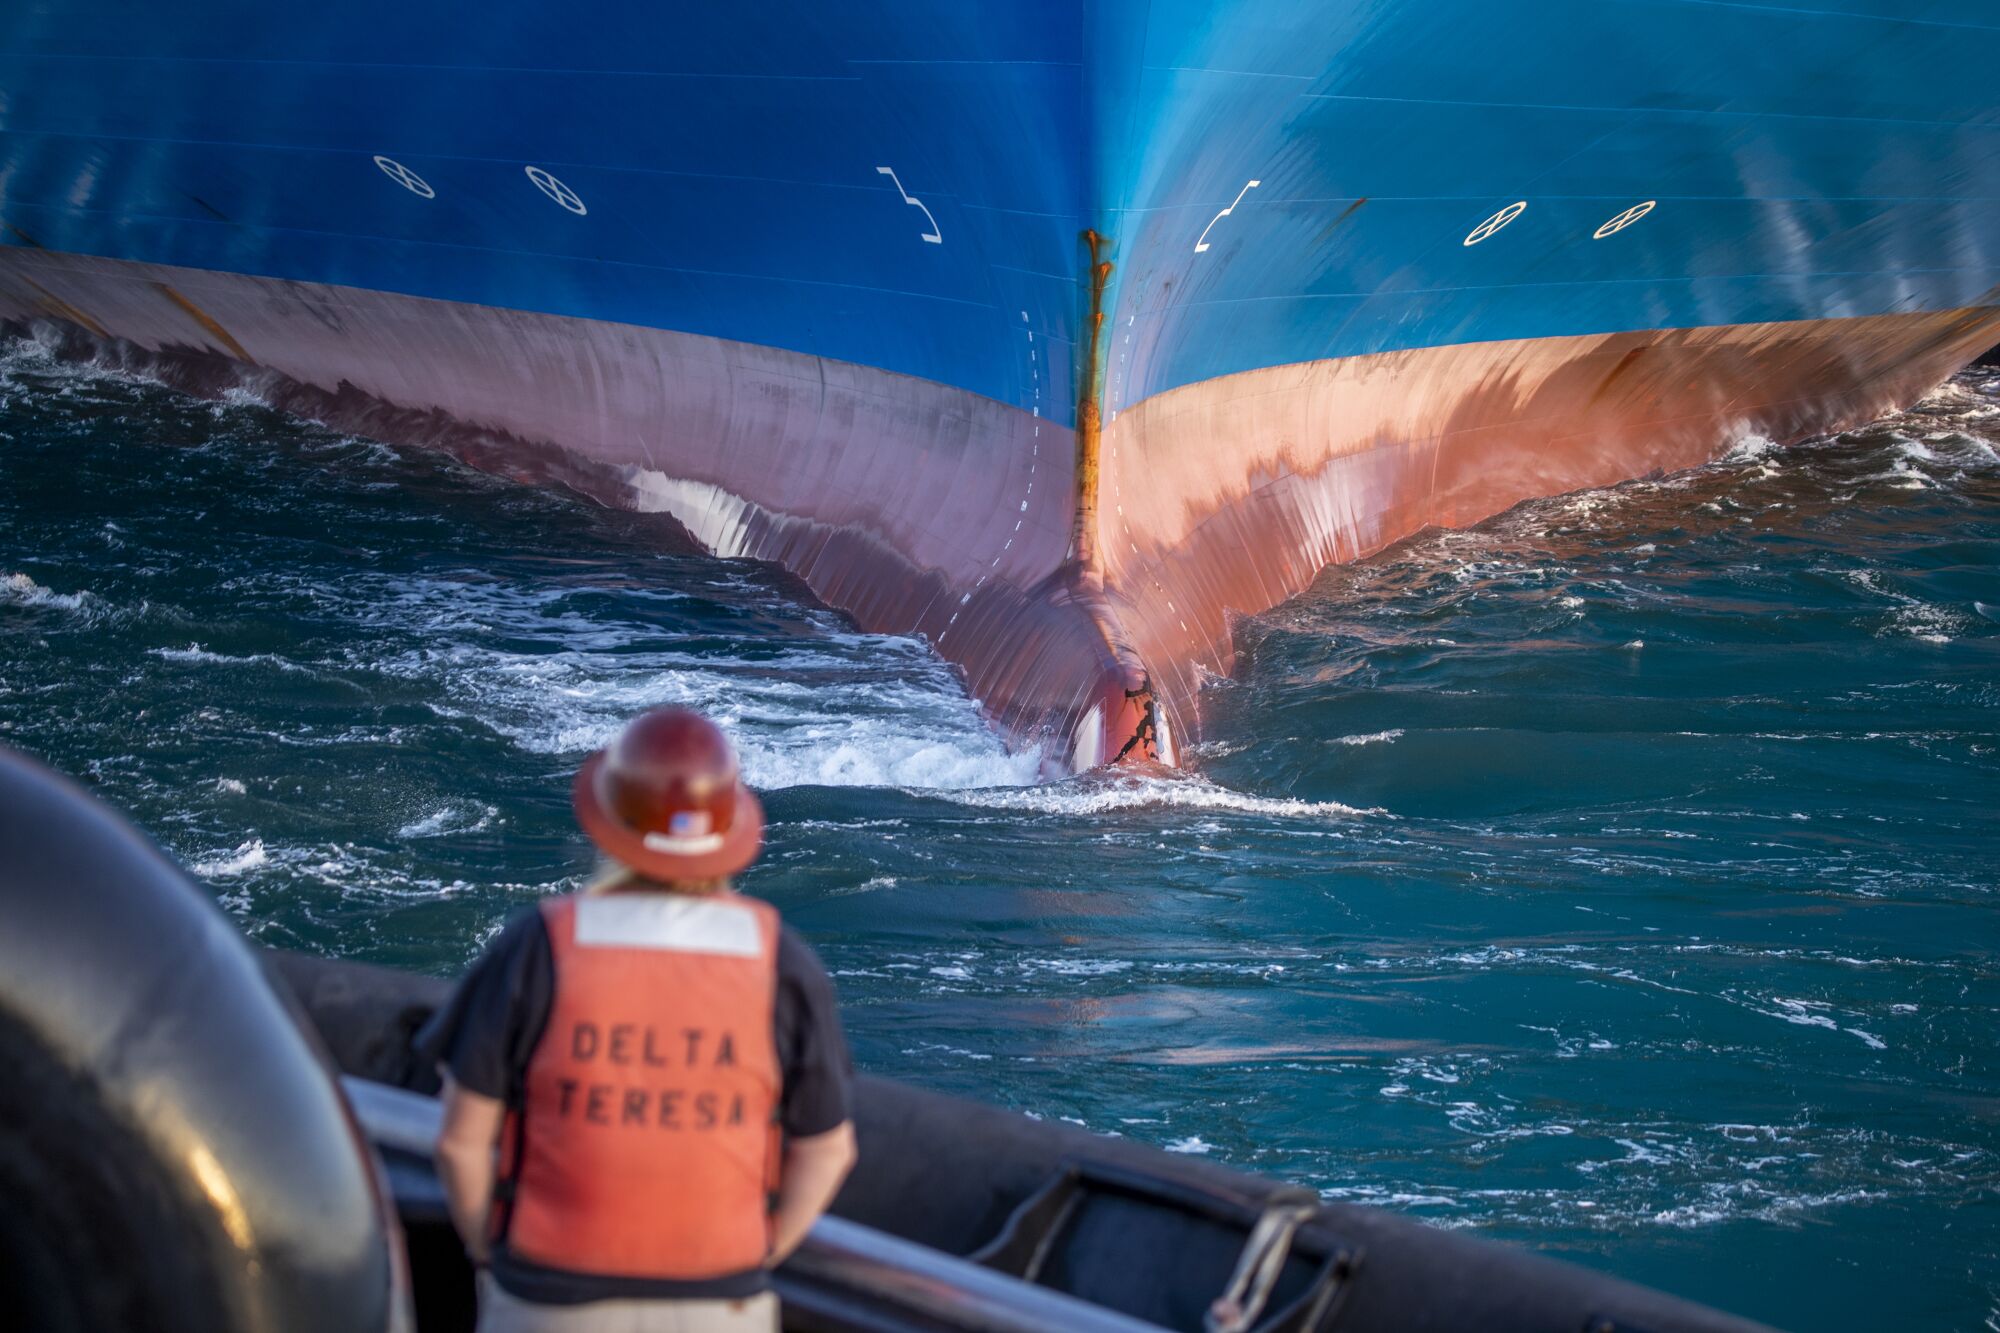 The bow of a container ship approaches the tugboat Delta Teresa as deckhand Jessica Huber watches.